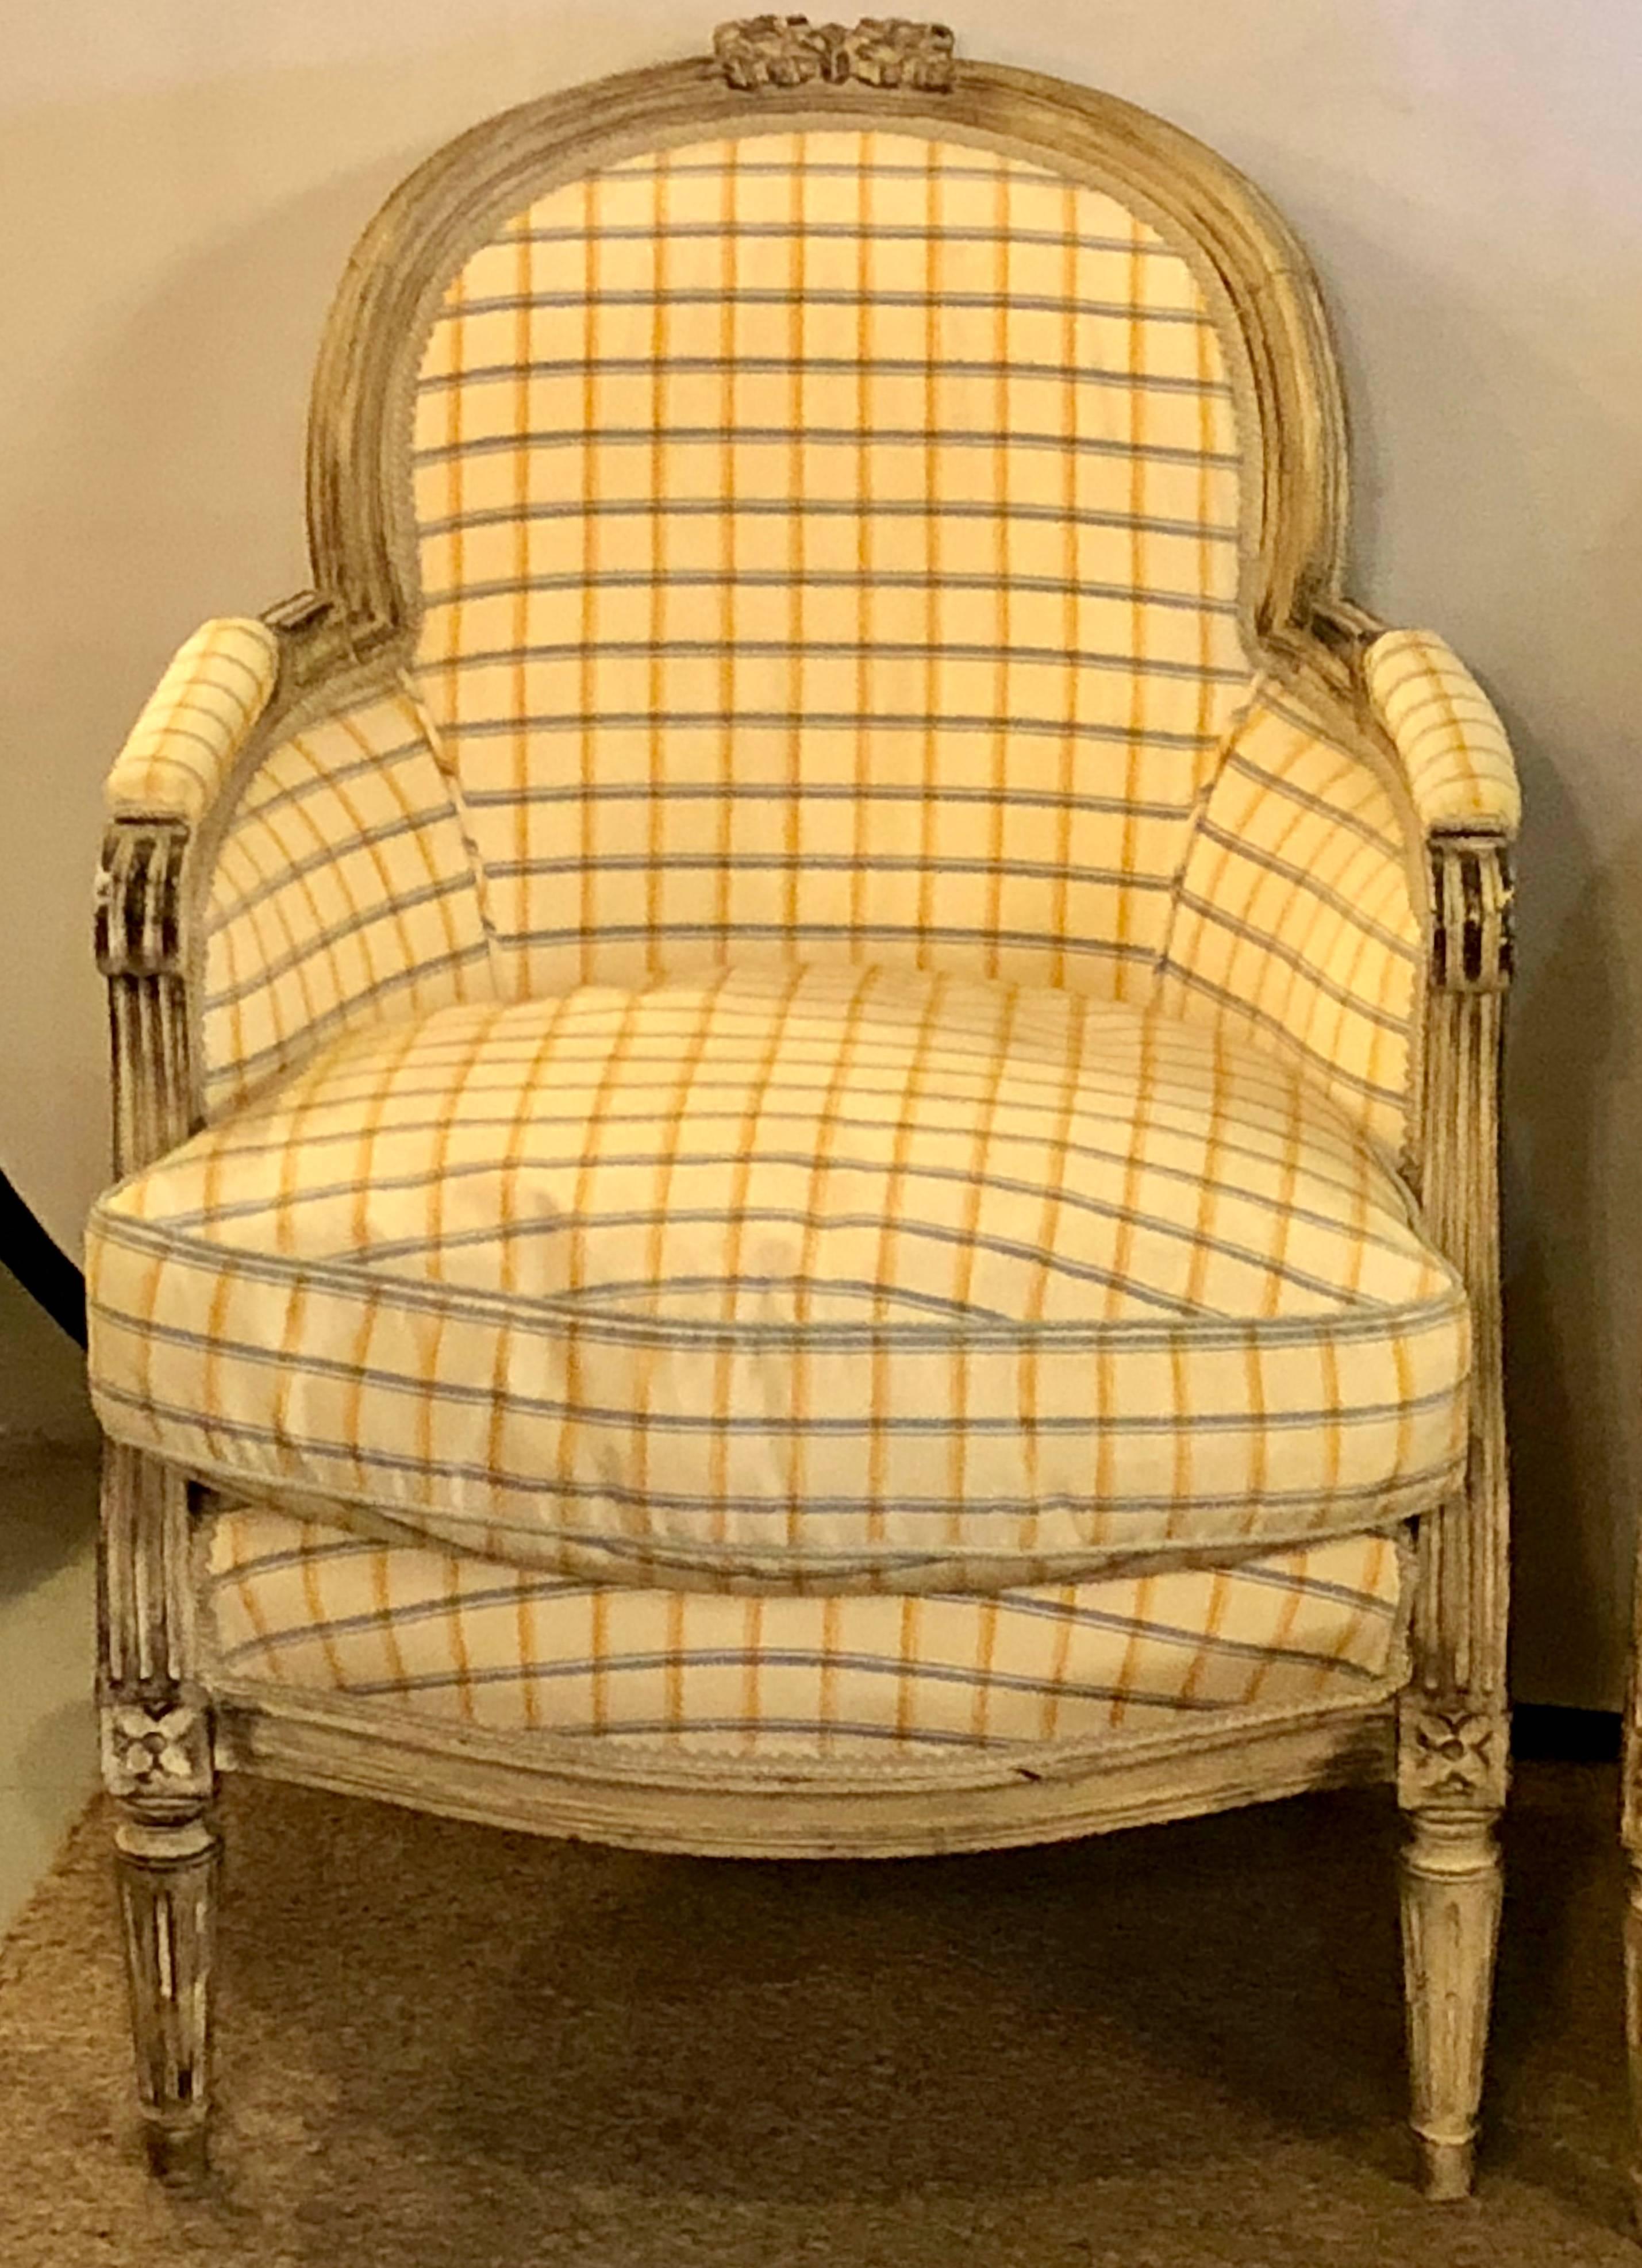 Pair of Maison Jansen Louis XVI style bergere chairs in a Burberry fashioned fabric. These fine antiqued paint decorated bergere chairs depict this iconic designers flare for fashion at the firms highest peek. The worn and weathered frames in an off